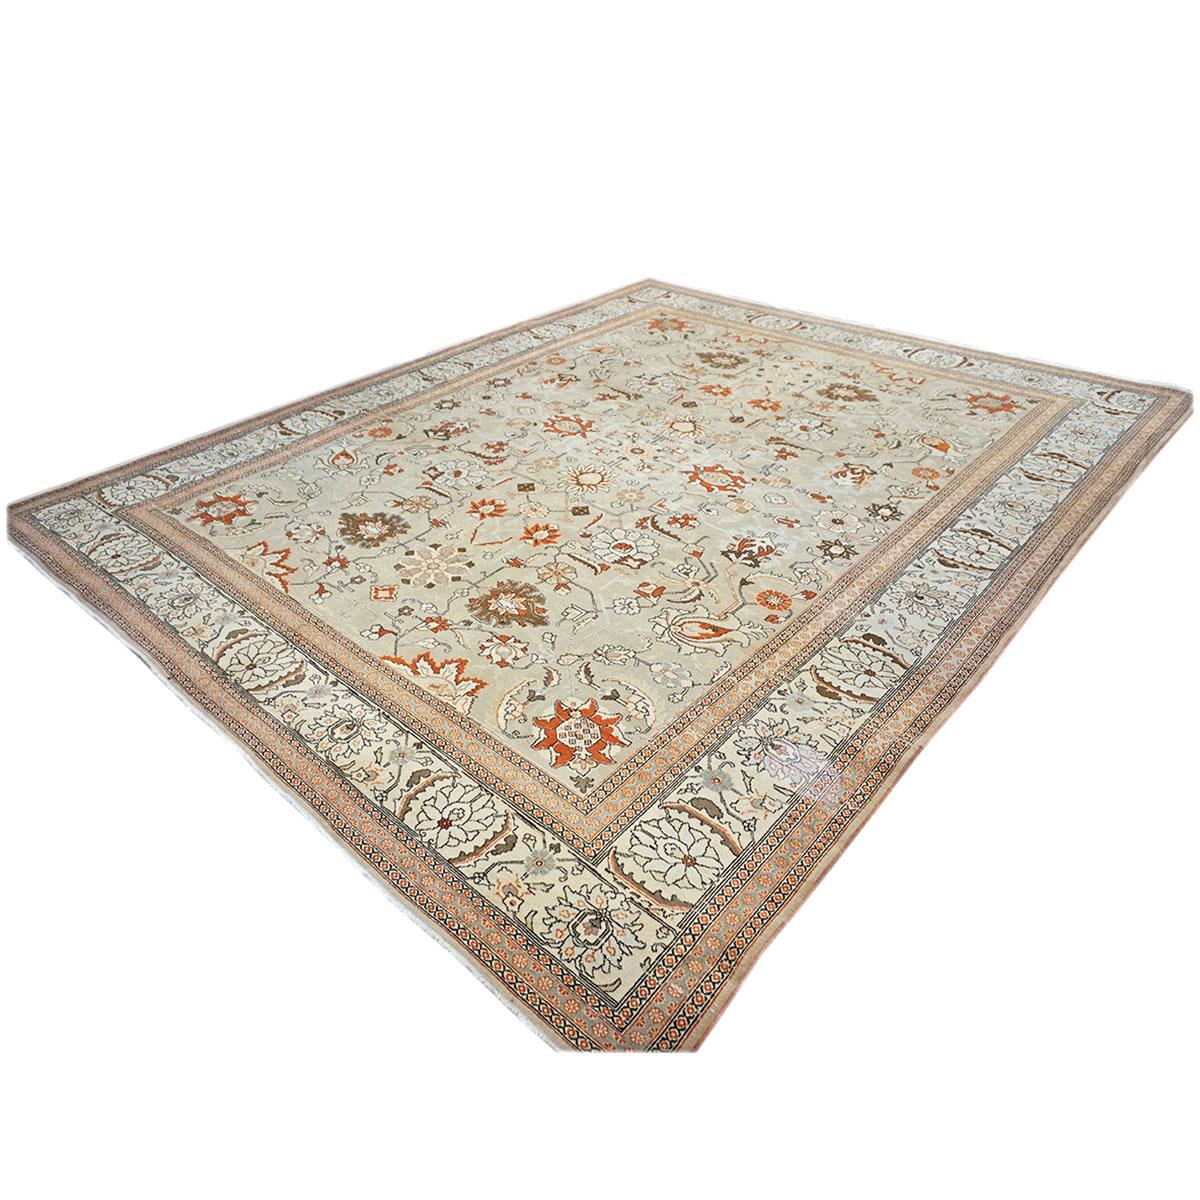 Antique Persian Tabriz 10x13 Tan, Ivory & Rust Handmade Area Rug In Good Condition For Sale In Houston, TX